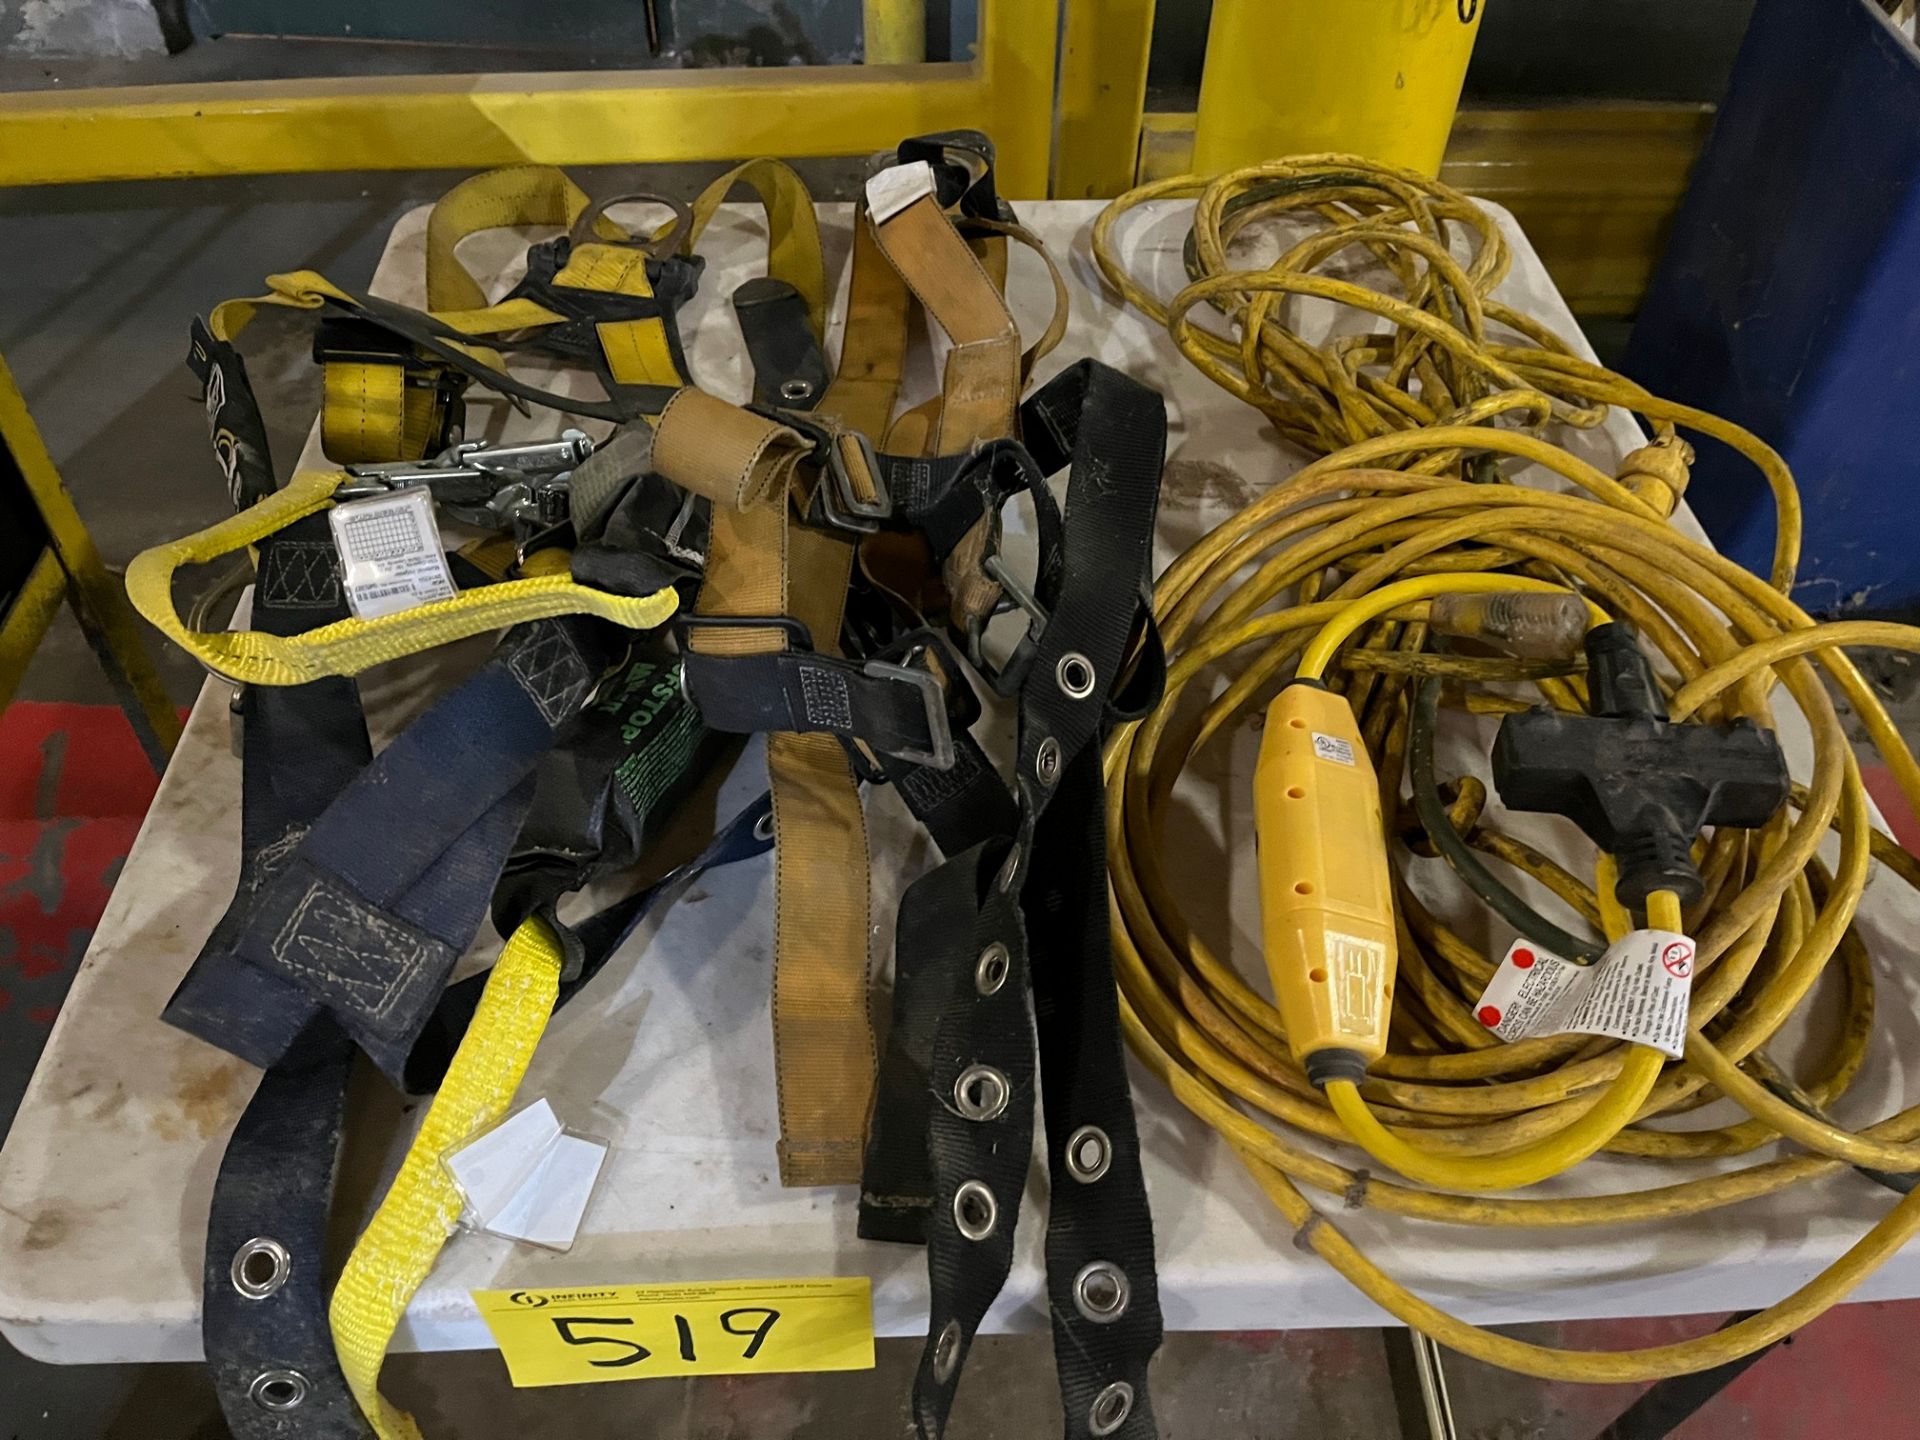 LOT OF (2) TABLES W/ CONTENTS INCLUDING HARNESSES, EXTENSION CORDS, METRO VACUUM, DAYTON HAND PUMPS, - Image 4 of 4